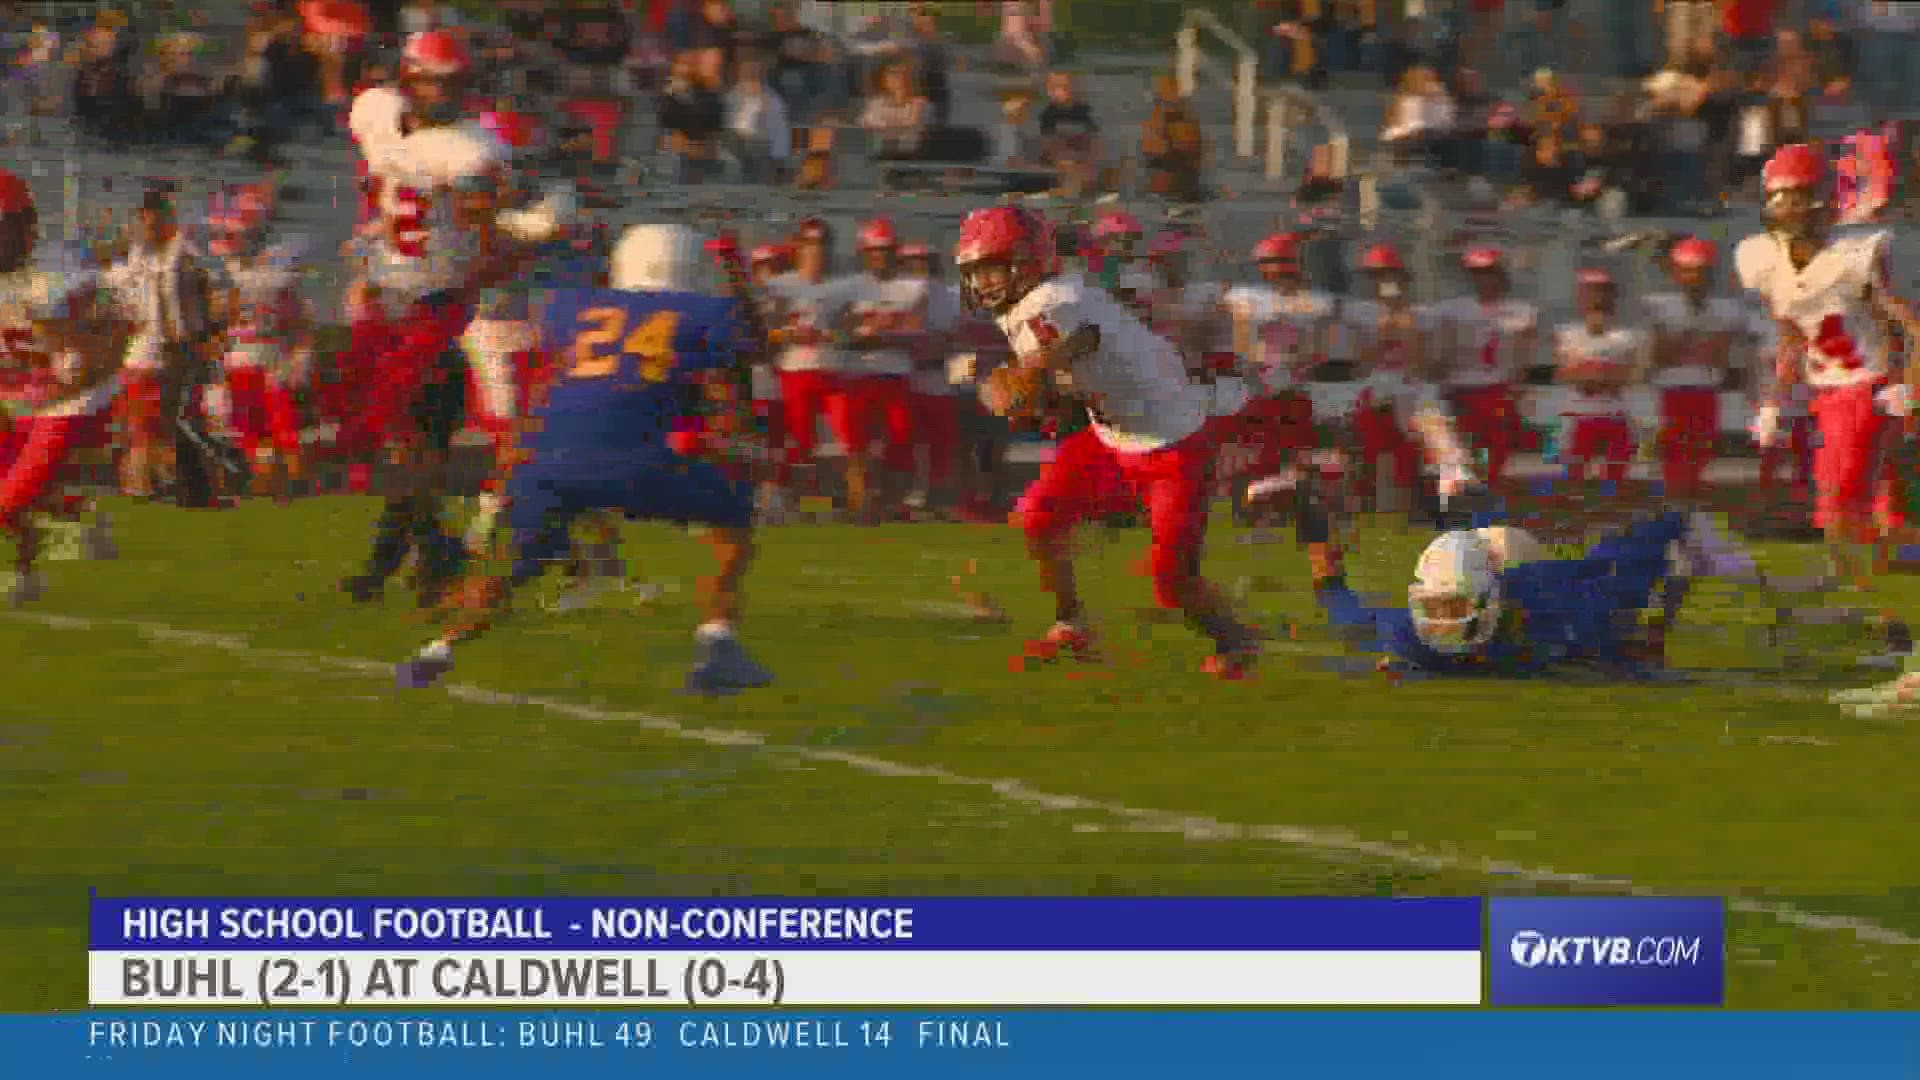 The Buhl Indians moved to 3-1 on the season Friday night, taking down the Caldwell Cougars (0-5) on the road 49-14.